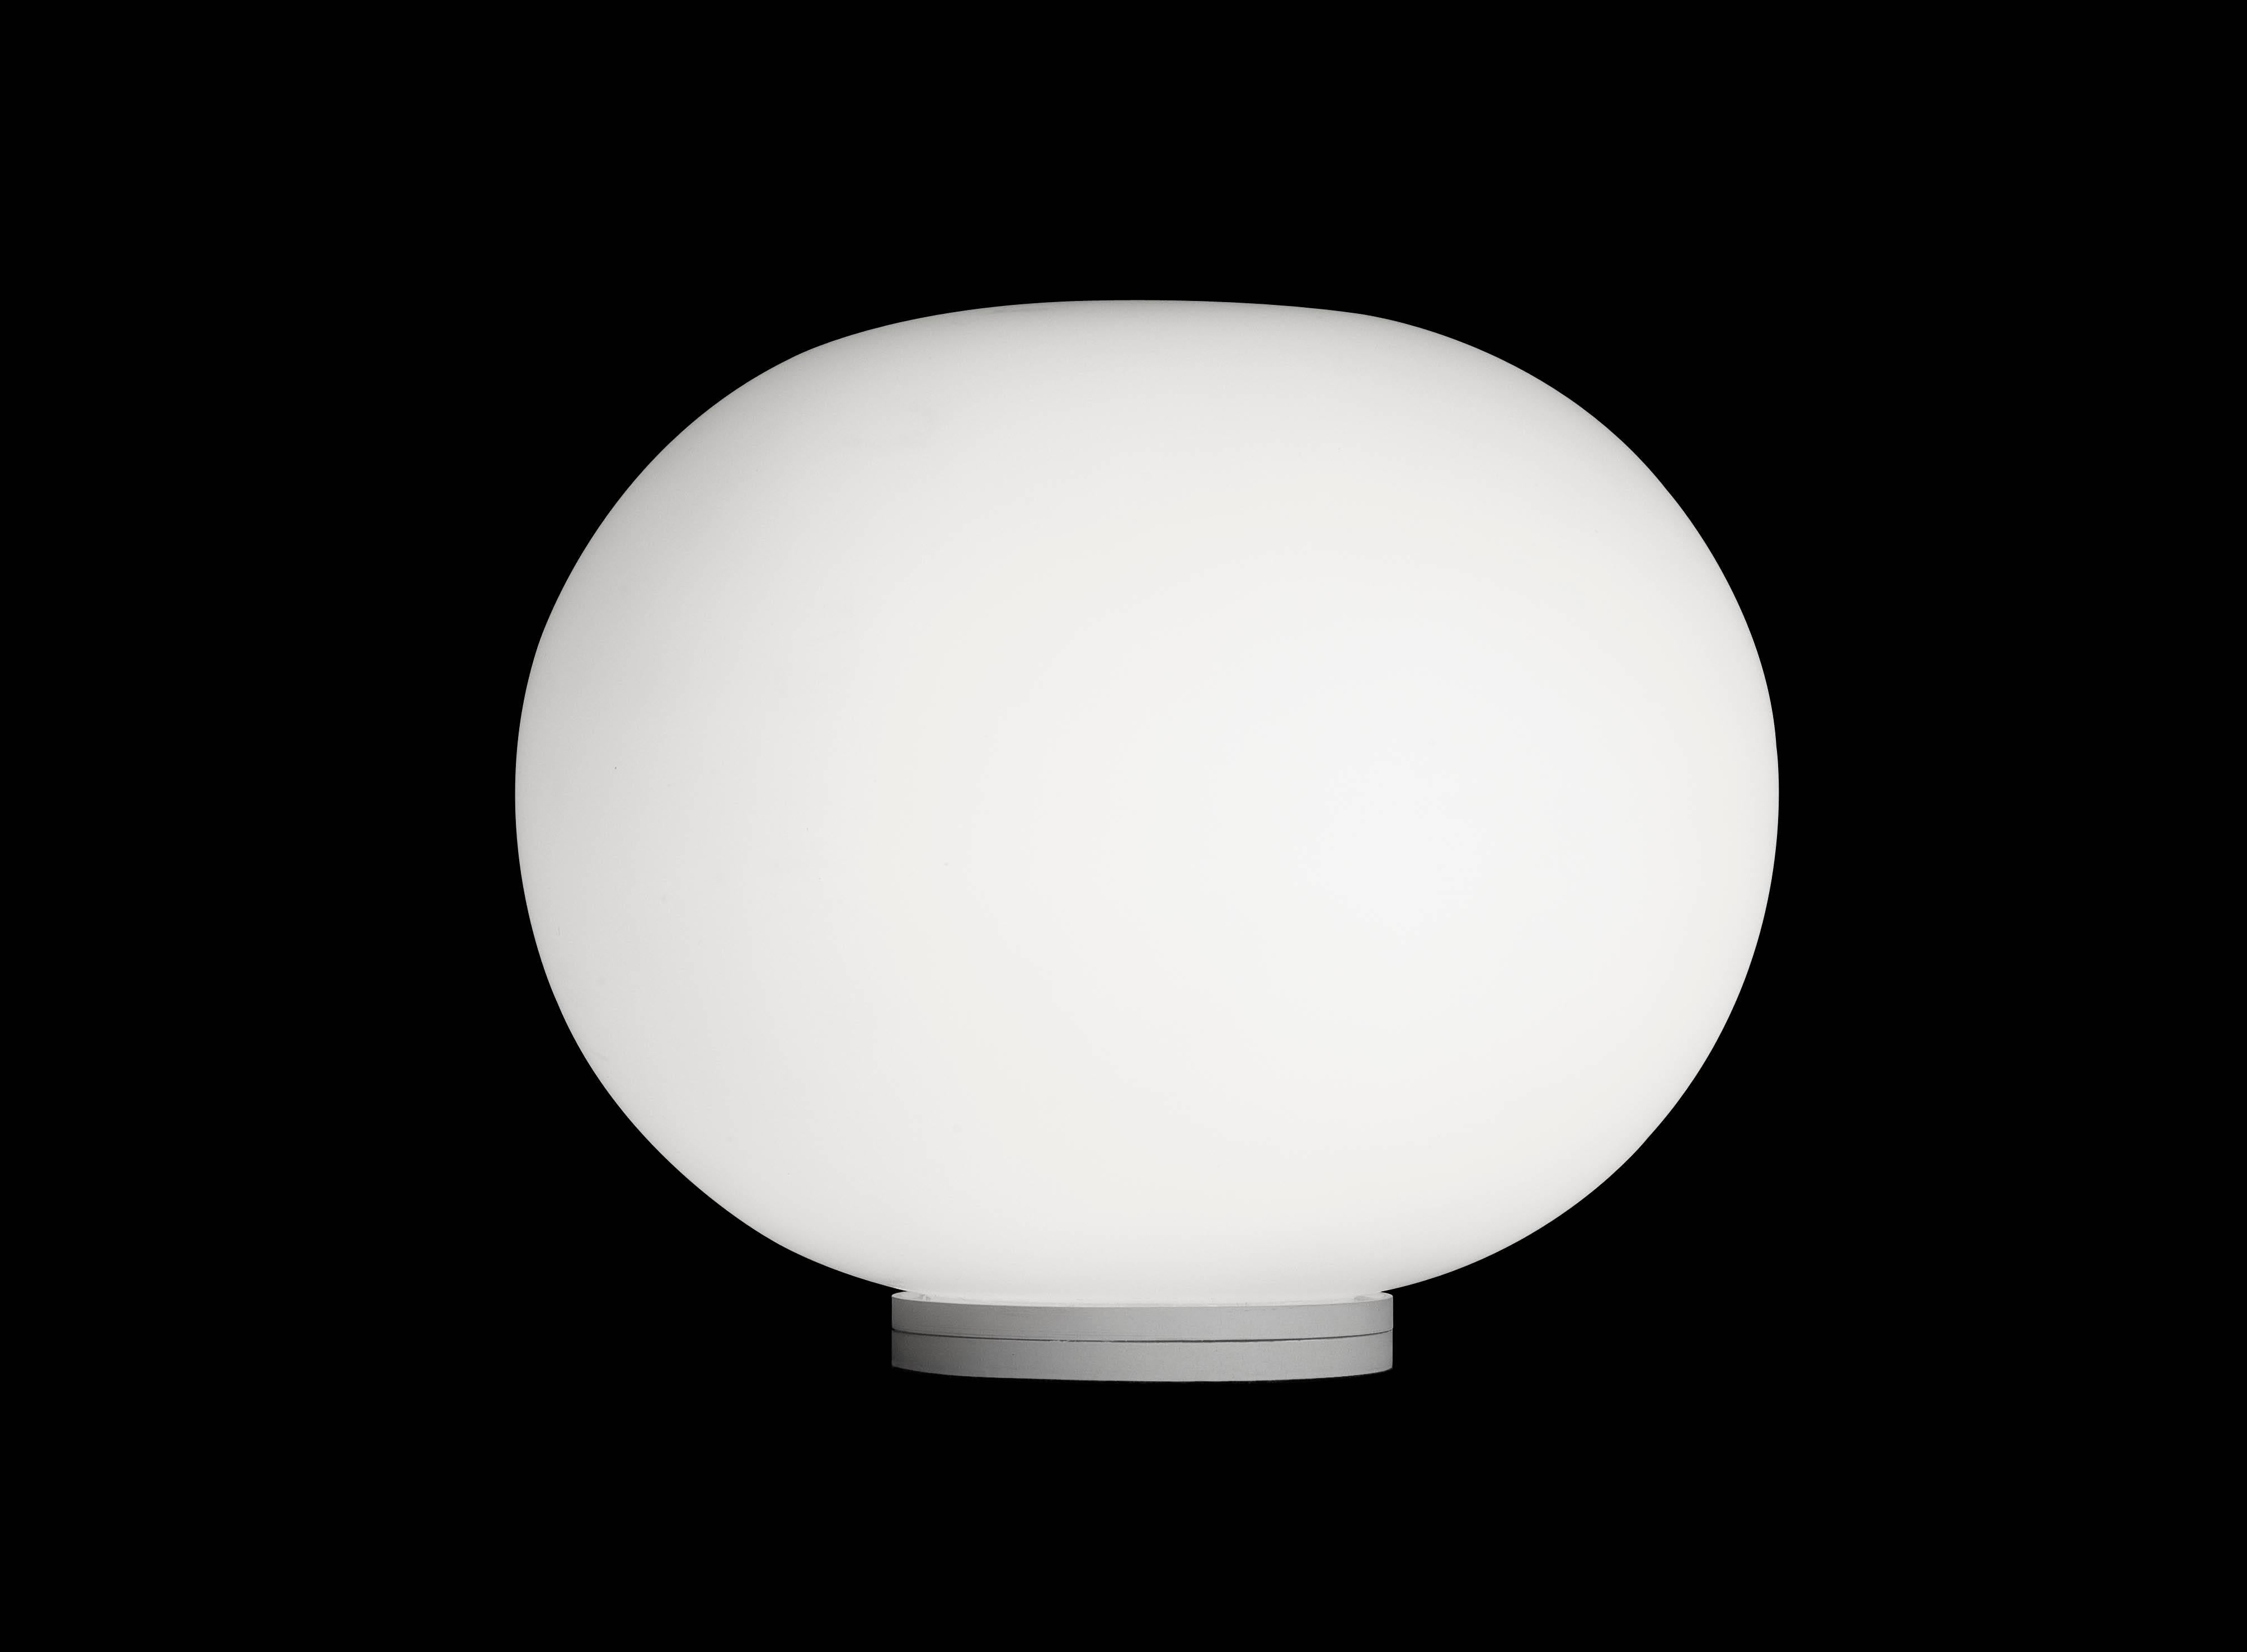 FLOS Glo-Ball Basic Zero Table Lamp by Jasper Morrison
Part of the popular Glo Ball Series, the Glo Ball Basic was created in 1998 by artist Jasper Morrison to invoke the radiant calm of a full moon. This unique table lamp has a white acid-etched